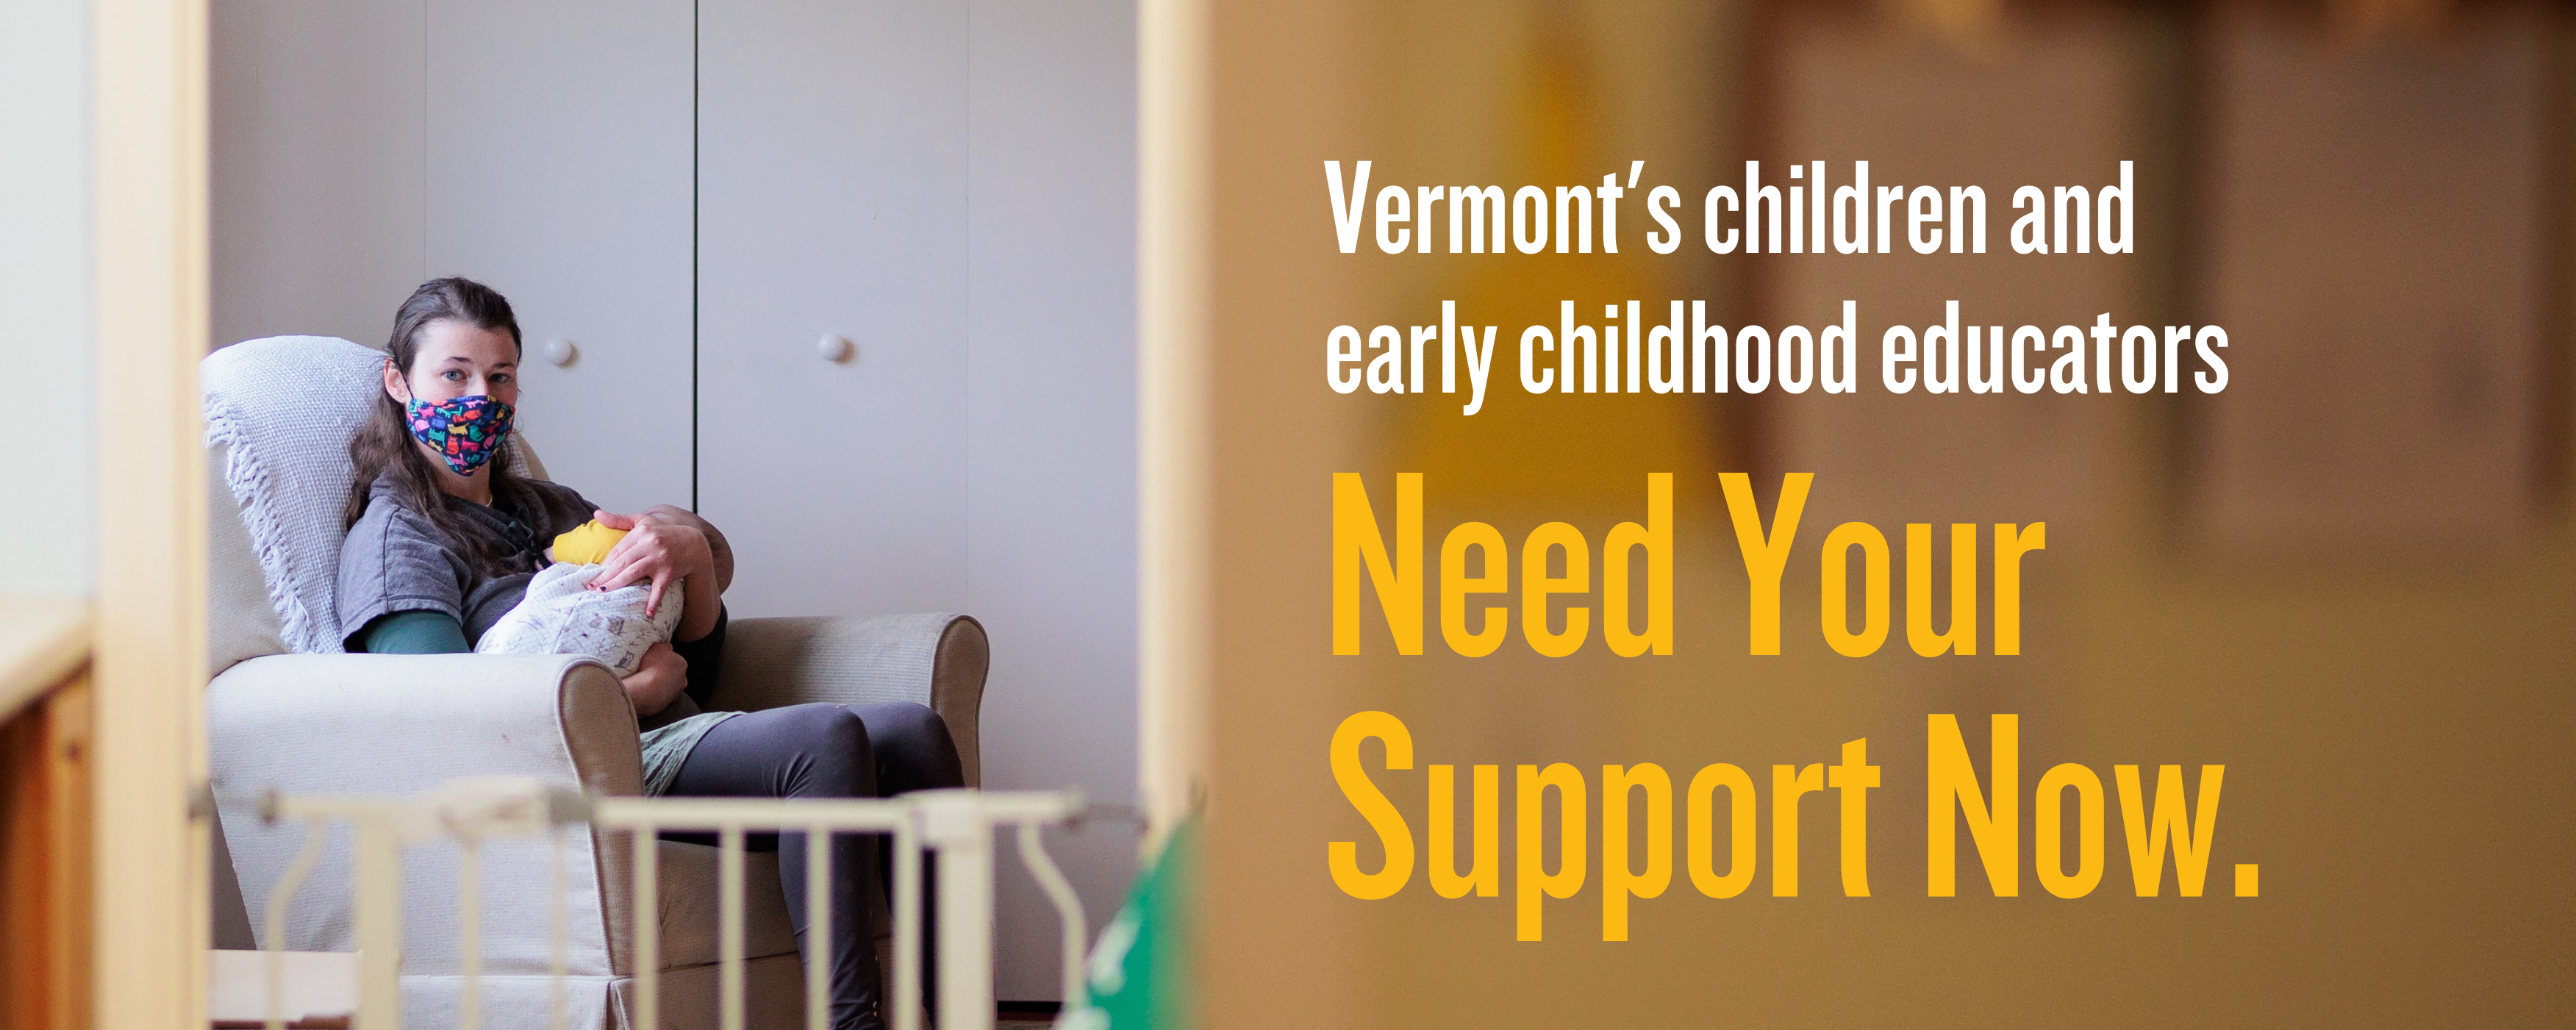 Vermont's children and early childhood educators need your support now.